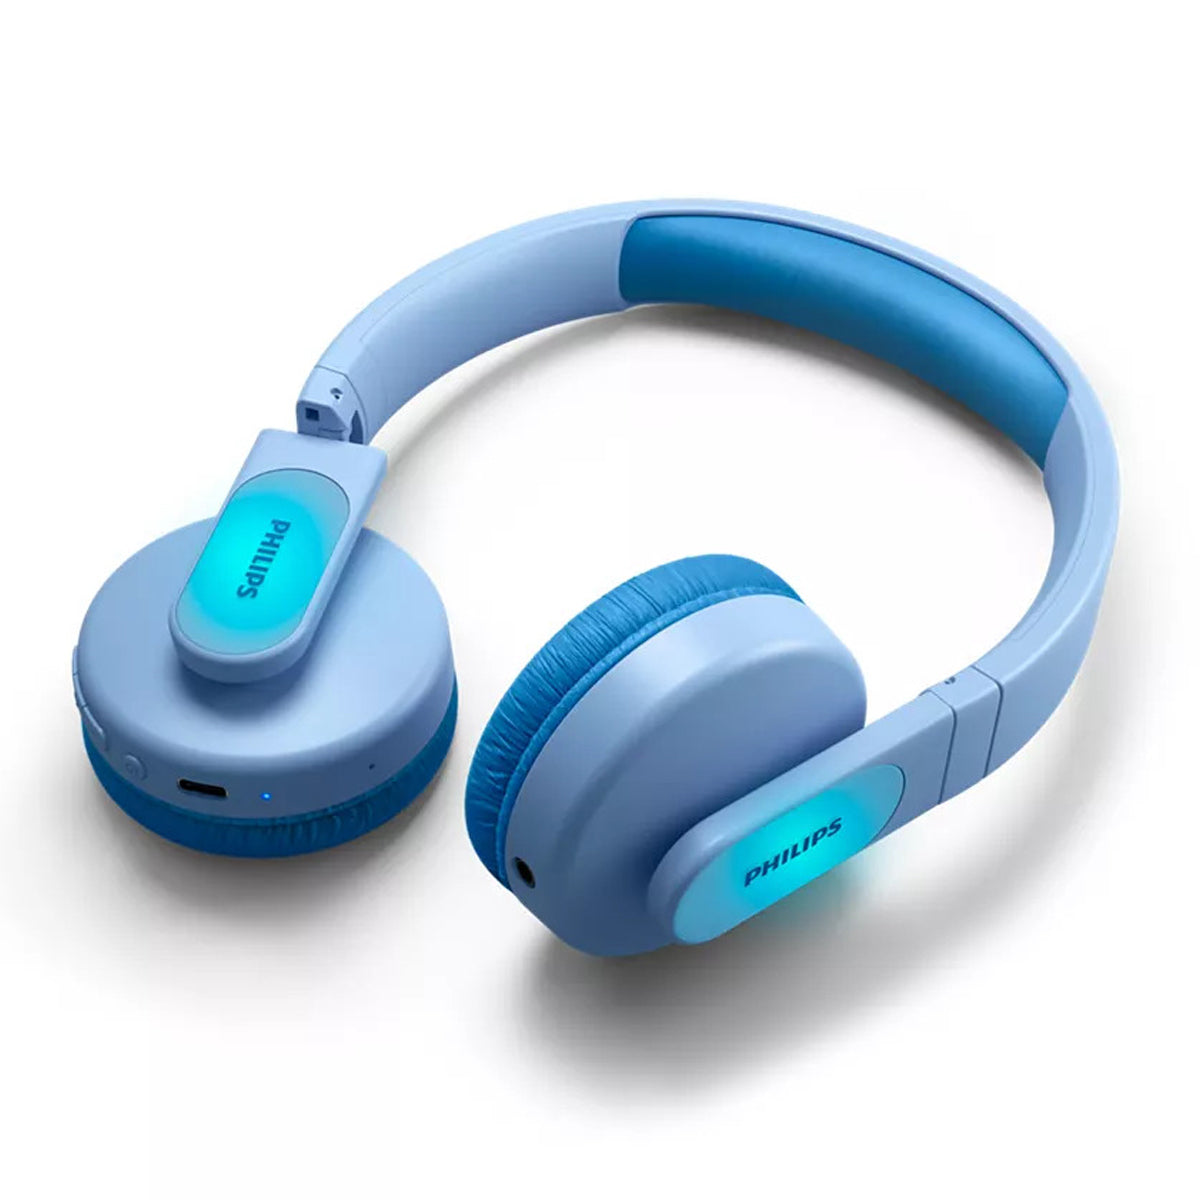 Philips TAK4206BL Wireless Bluetooth over ear headphones for children, colored LEDs, parental app control and 85dB volume limit, soft earcups